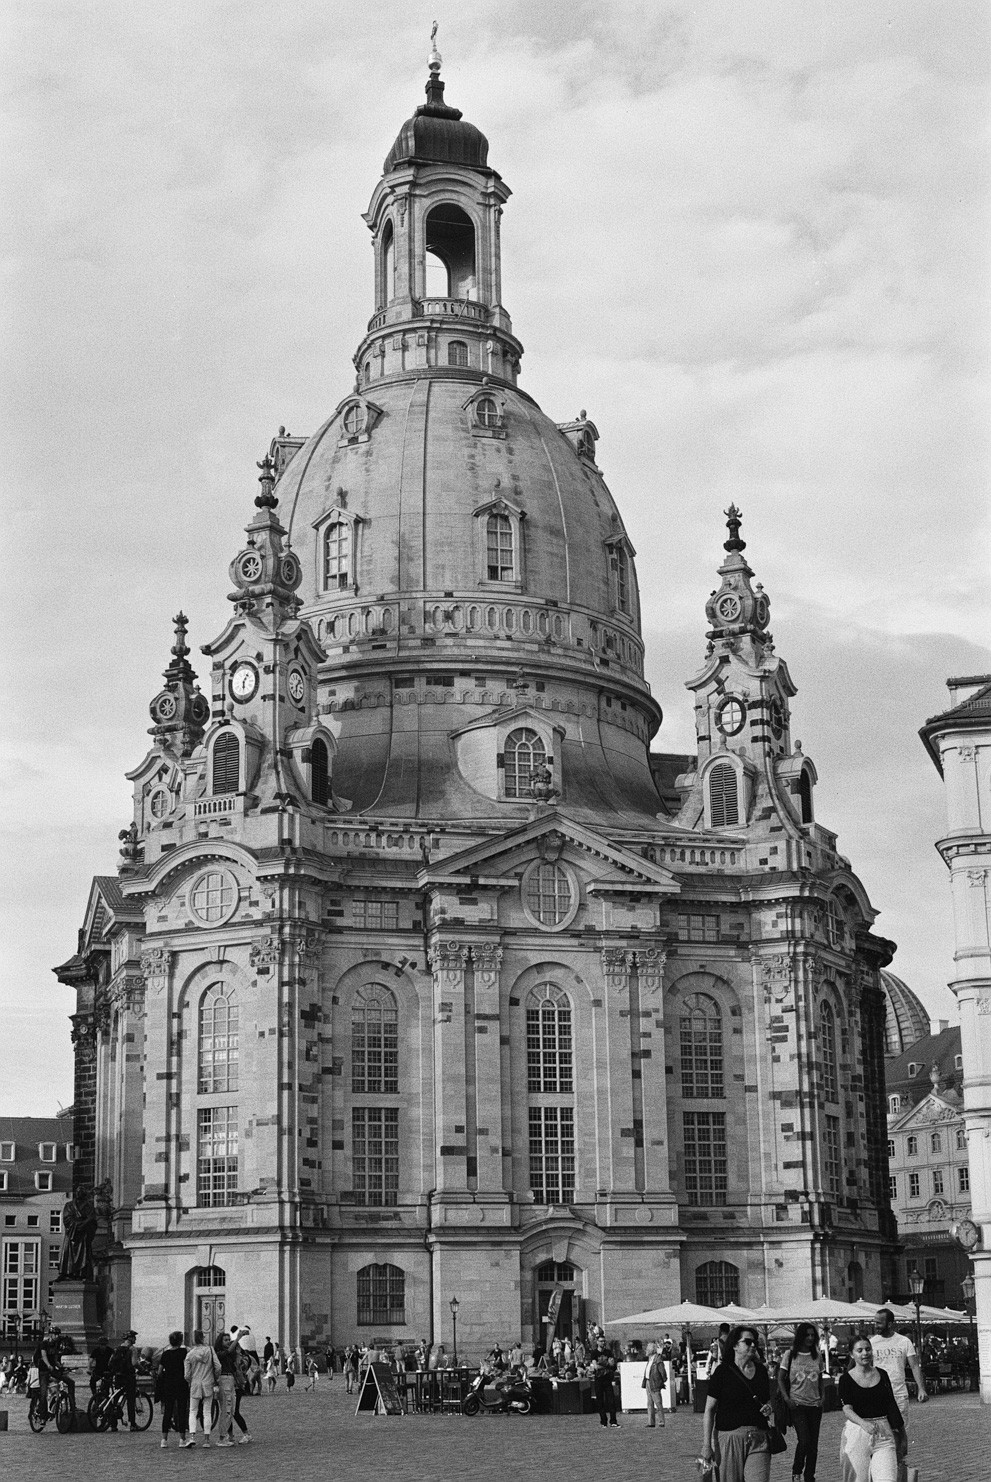 The Church of Our Lady (Frauenkirche) in Dresden in its full height with tourists walking in front of it. Shot on Fomapan 200 creative.